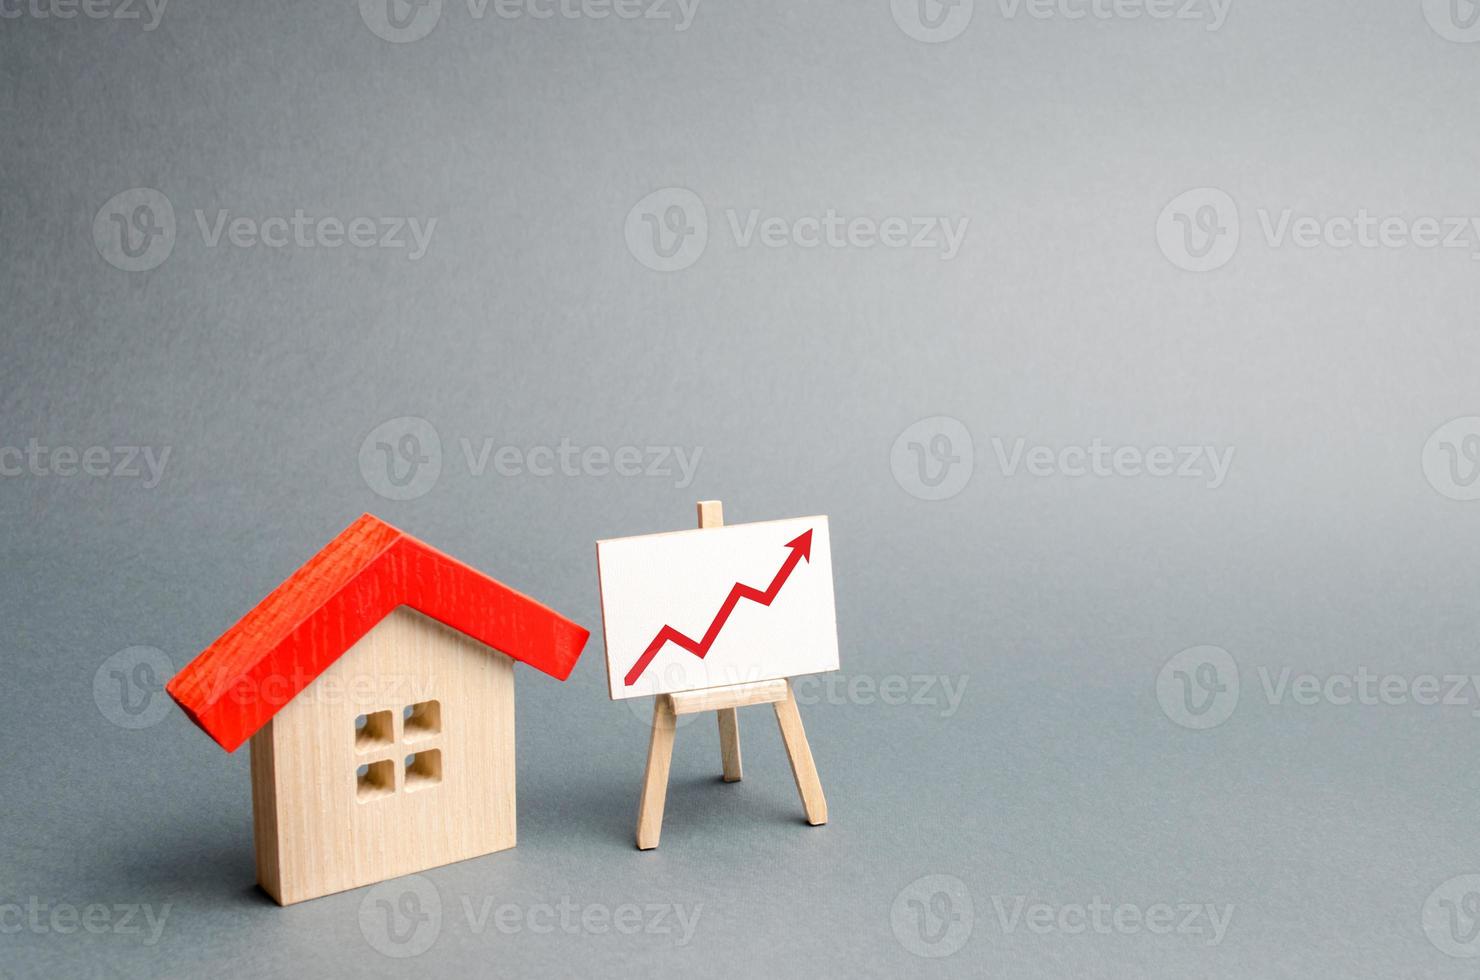 Wooden house and stand with red arrow up. Growing demand for housing and real estate. The growth of the city and its population. Investments. concept of rising prices for housing. Selective focus photo